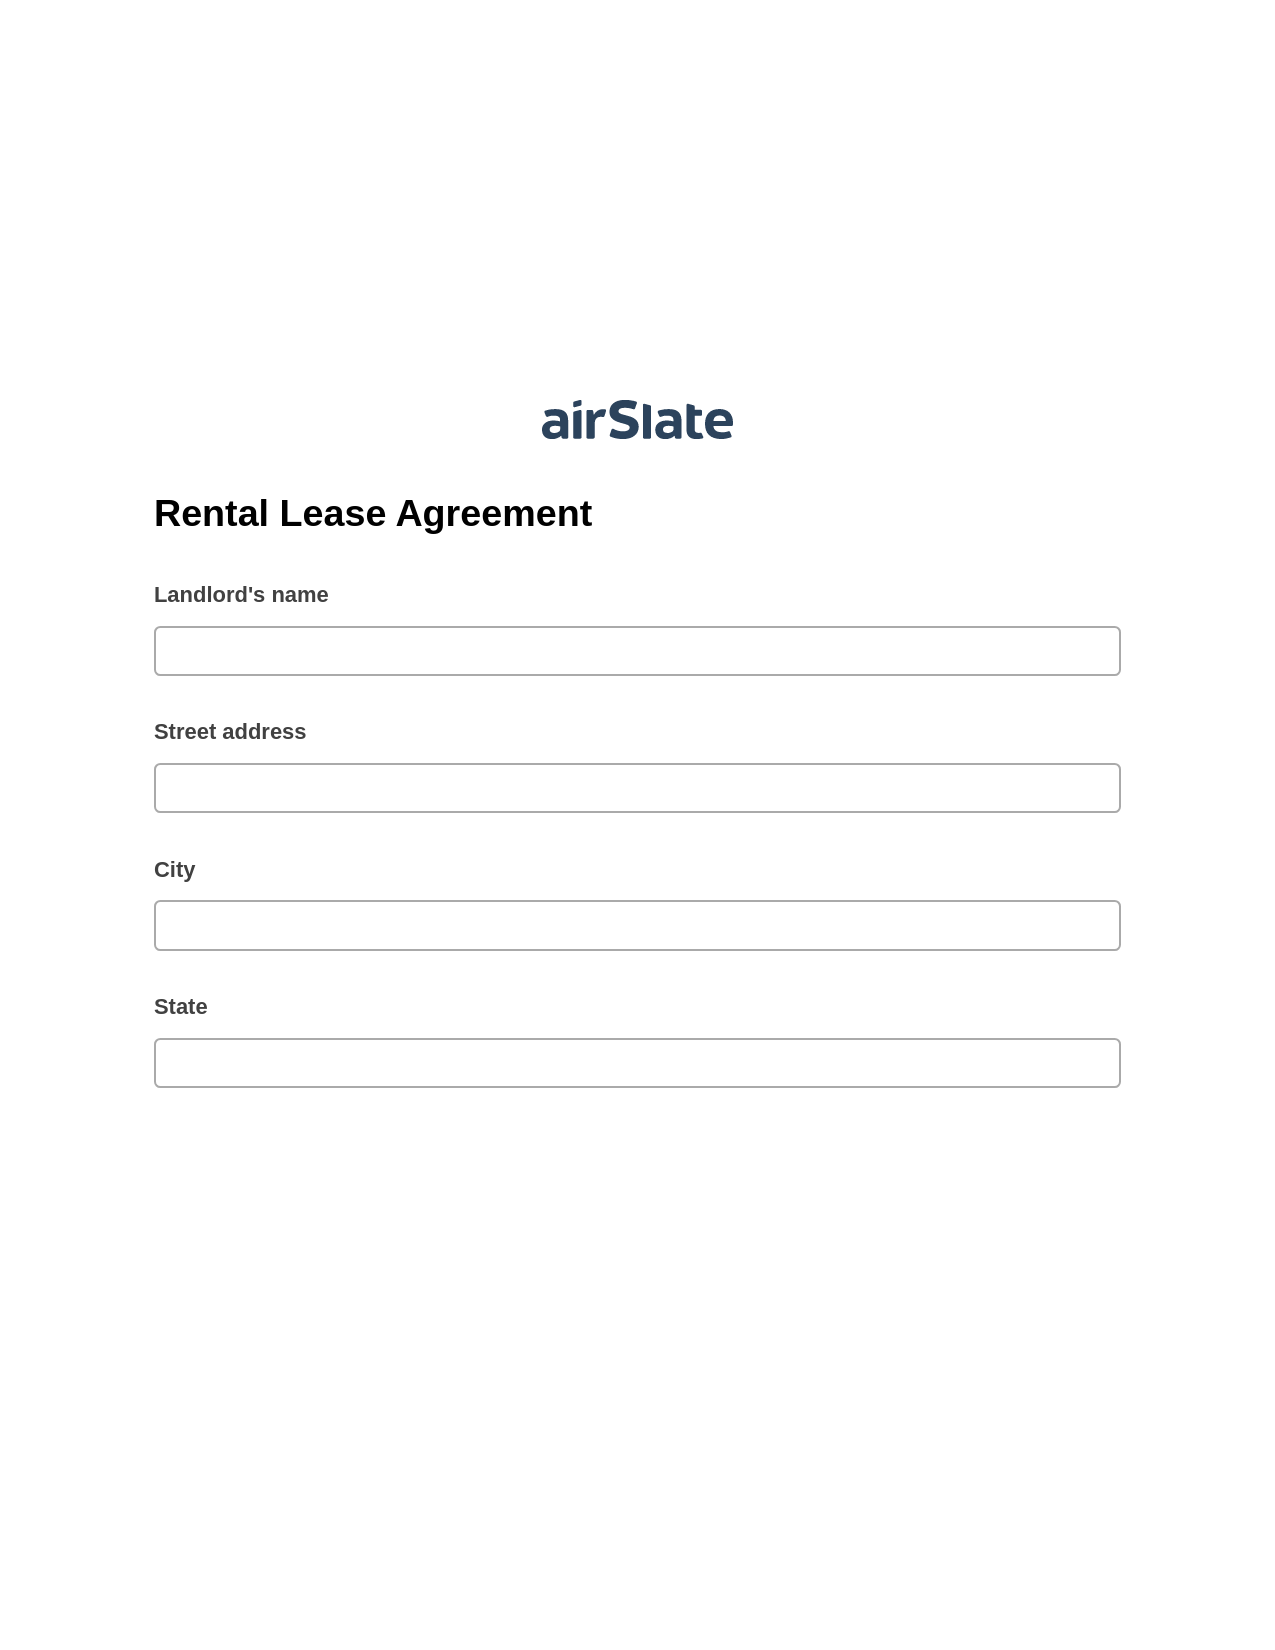 Rental Lease Agreement Pre-fill Document Bot, Update MS Dynamics 365 Record Bot, Email Notification Postfinish Bot